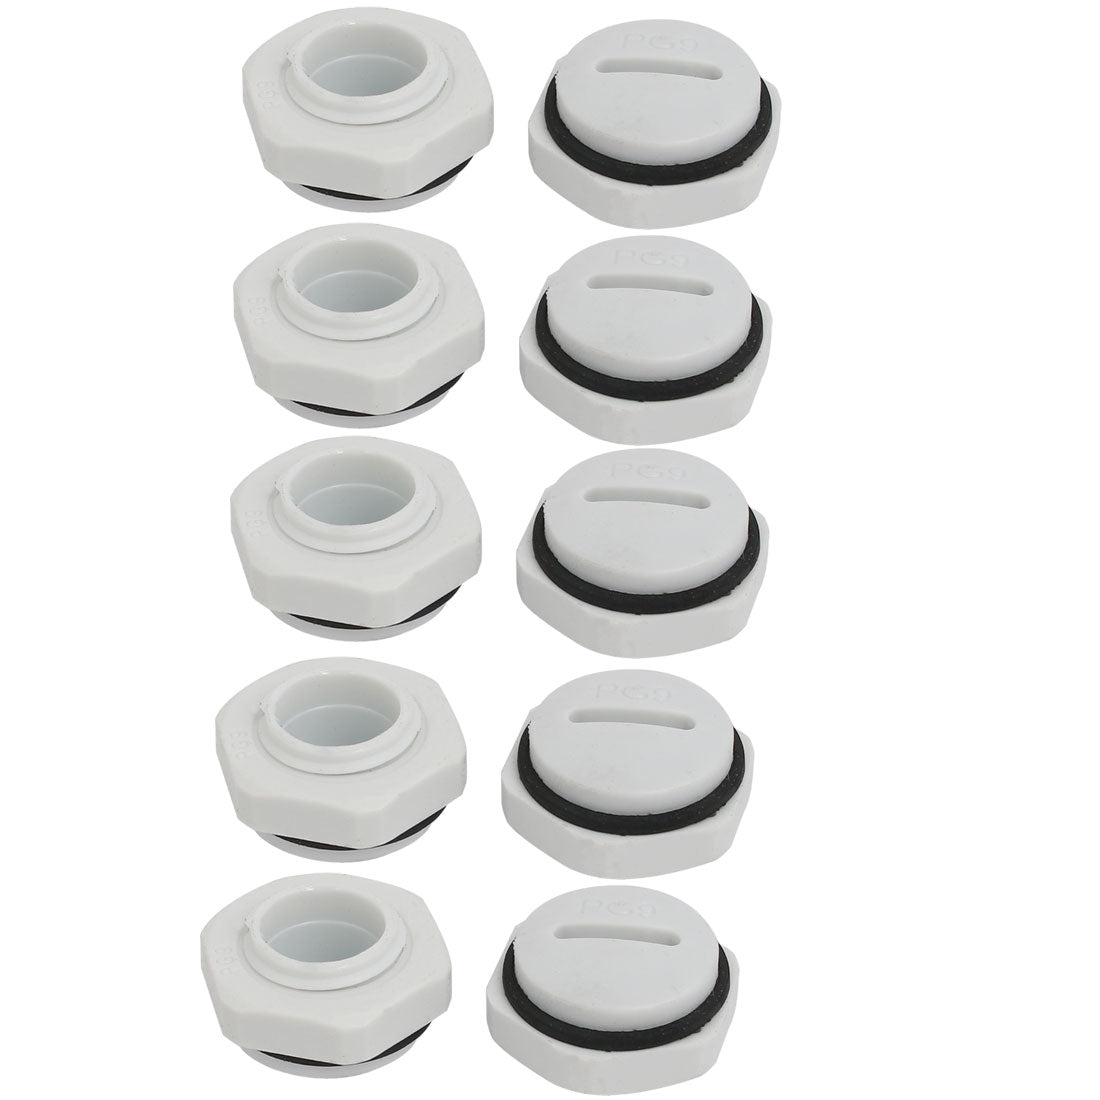 uxcell Uxcell PG9 Nylon Male Threaded Cable Gland Screw End Cap Cover Gray 10pcs